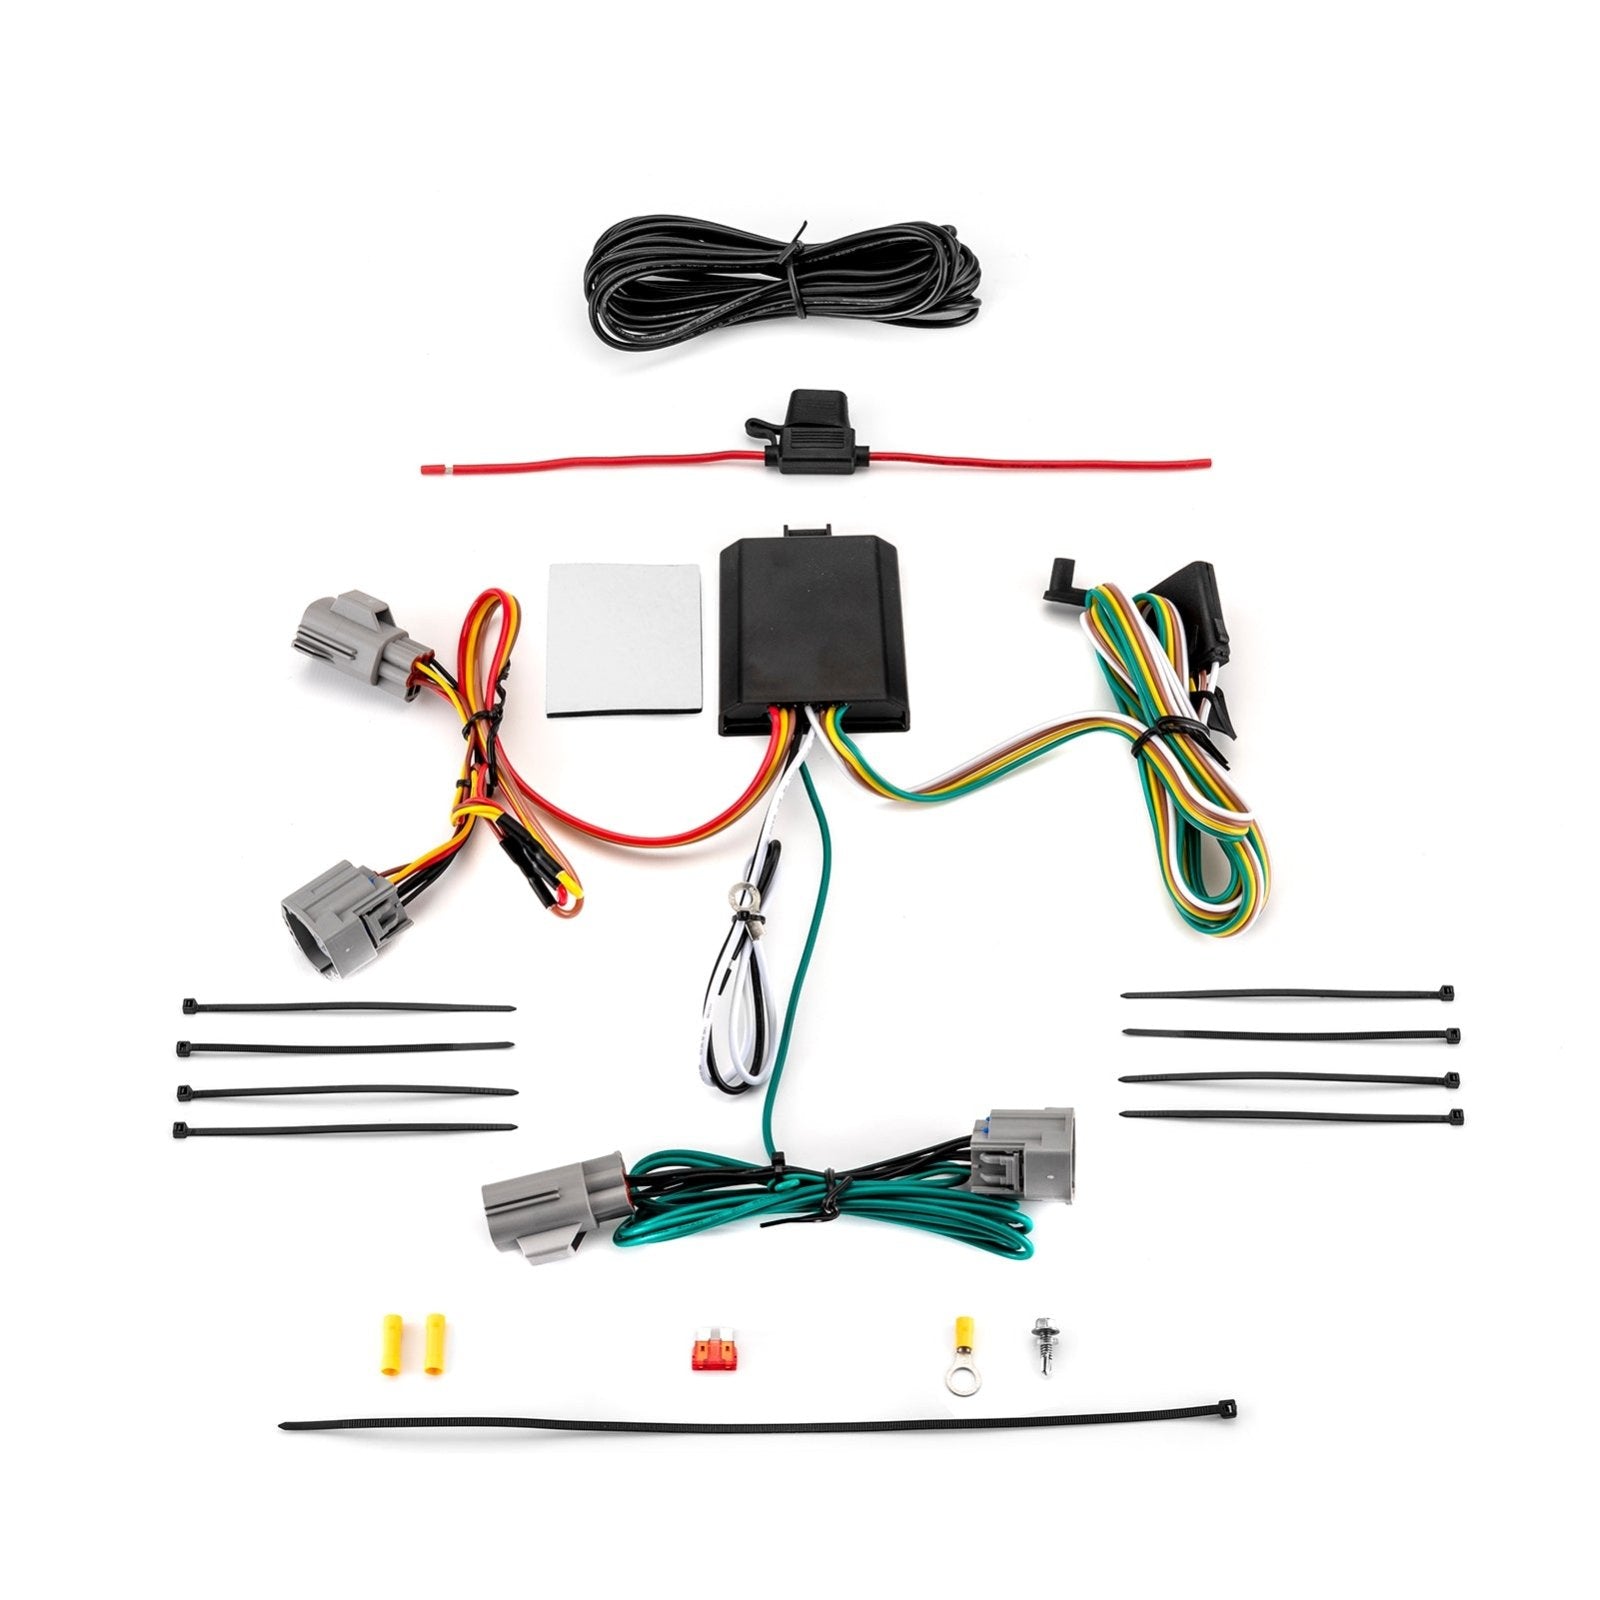 4-Pin Trailer Wiring Harness Plug & Play for 2008-2012 Dodge Nitro Jeep Liberty All Models 56334 - Weisen